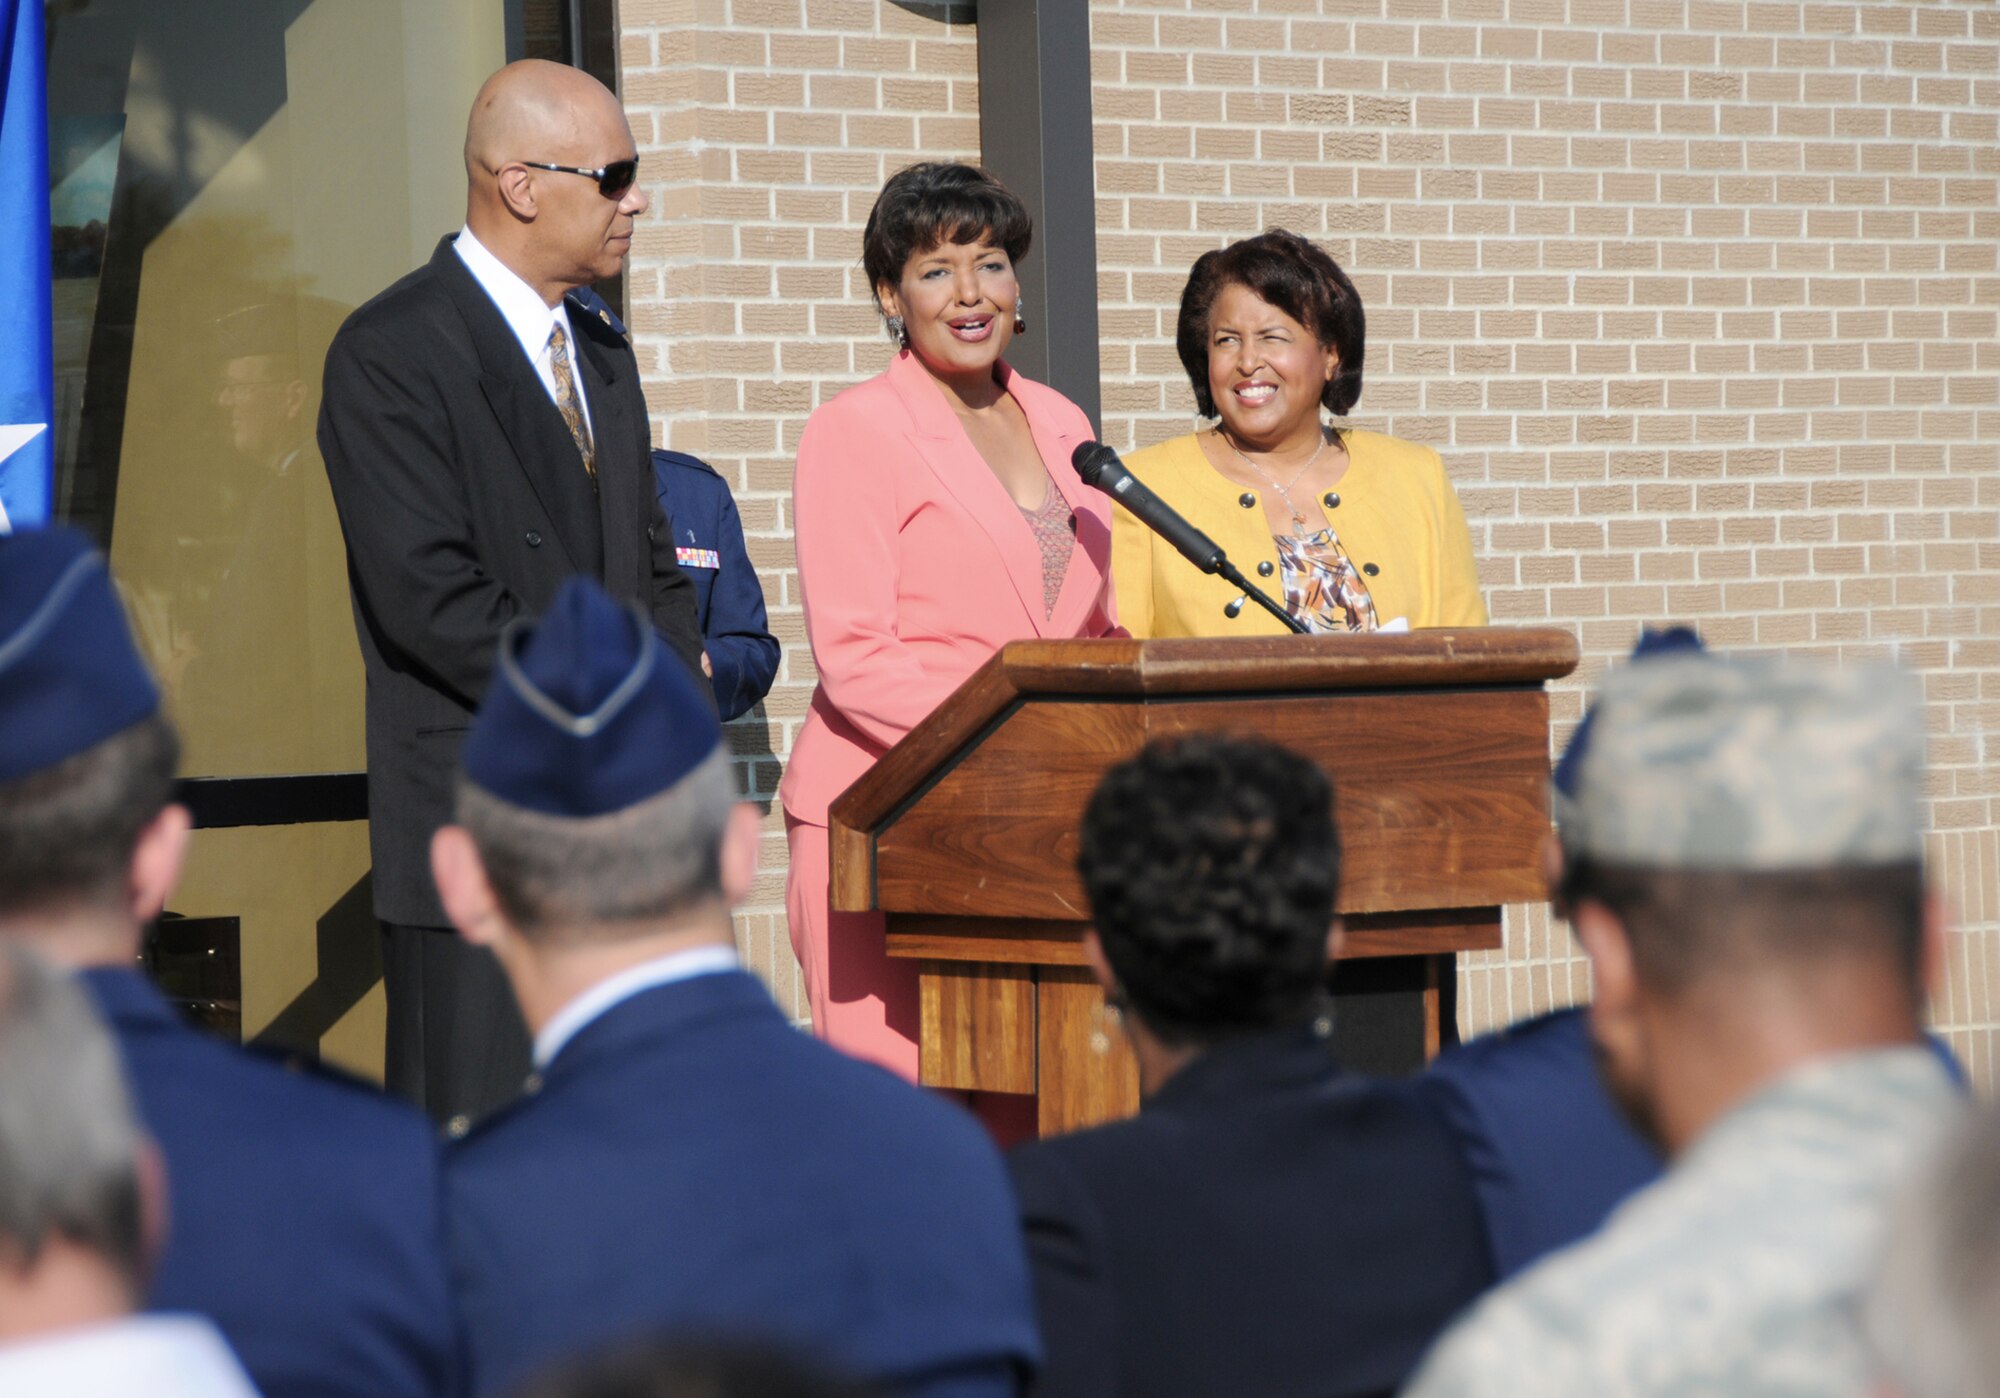 Airmen from Keesler Air Force Base, Miss., performed a dedication ceremony of the Consolidated Aircraft Maintenance Facility named after Col. (Ret.) Lawrence Roberts who served as a Tuskegee Airman and adopted Biloxi, Miss., as his home. The $22.6 million facility will be used to maintain the C-130J six-bladed composite propeller, and many other significant maintenance capabilities. The Roberts' family, along with more than 250 community and civic leaders, attended the ceremony. (U.S. Air Force photo/Kemberly Groue)